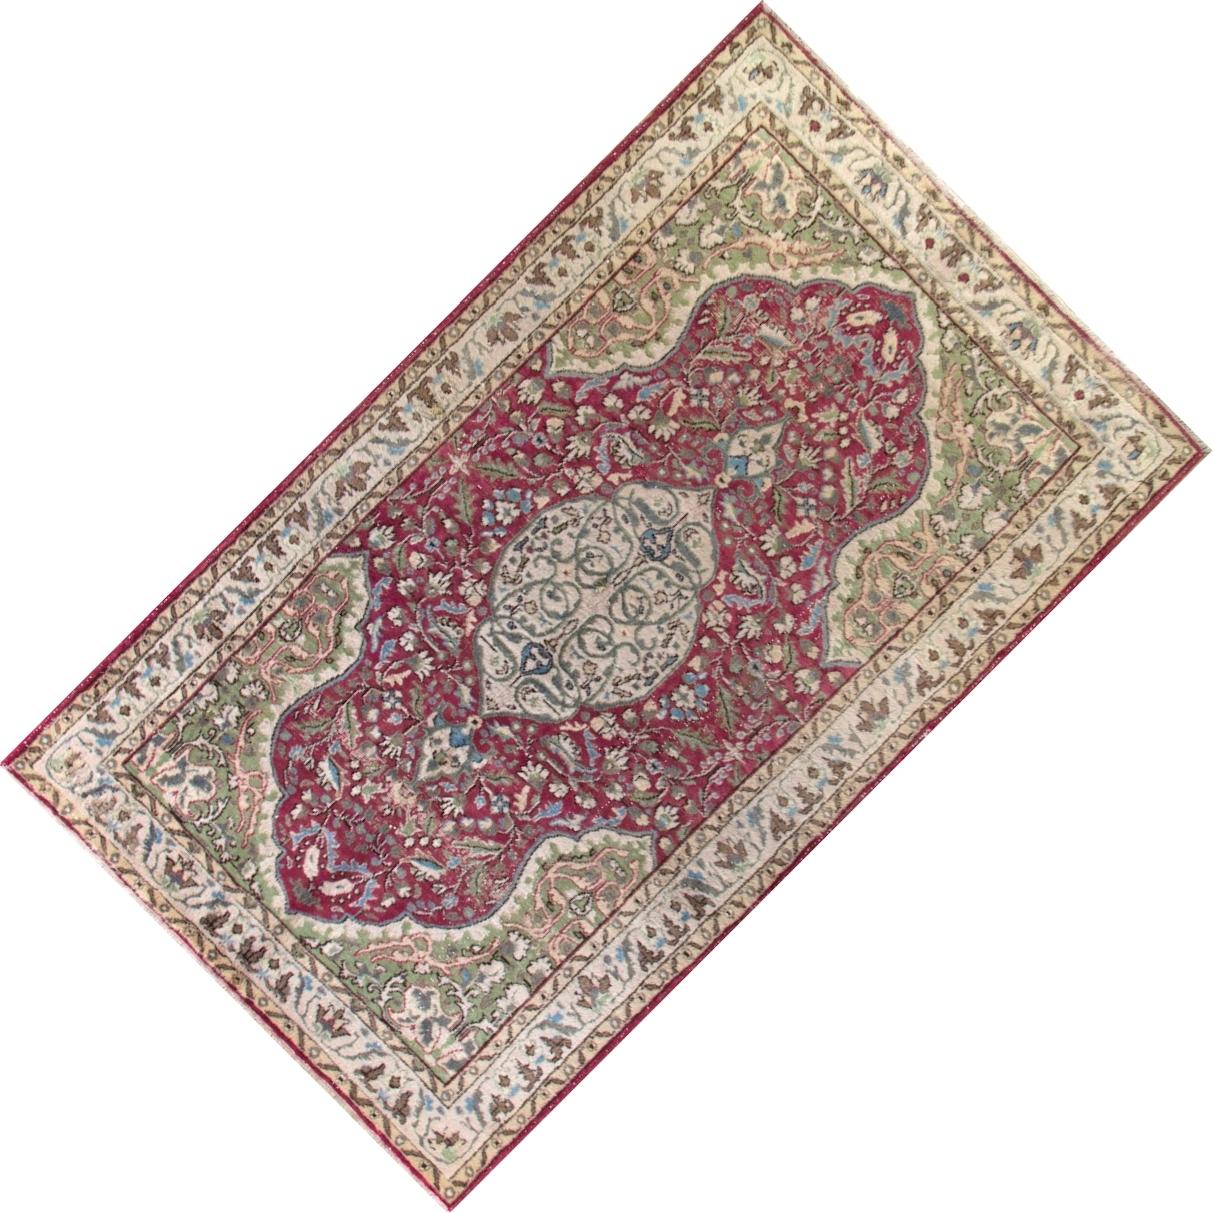 Turkish 5.6x9.2 Ft Vintage Oriental Rug in Red and Green, Hand Knotted Wool Carpet For Sale